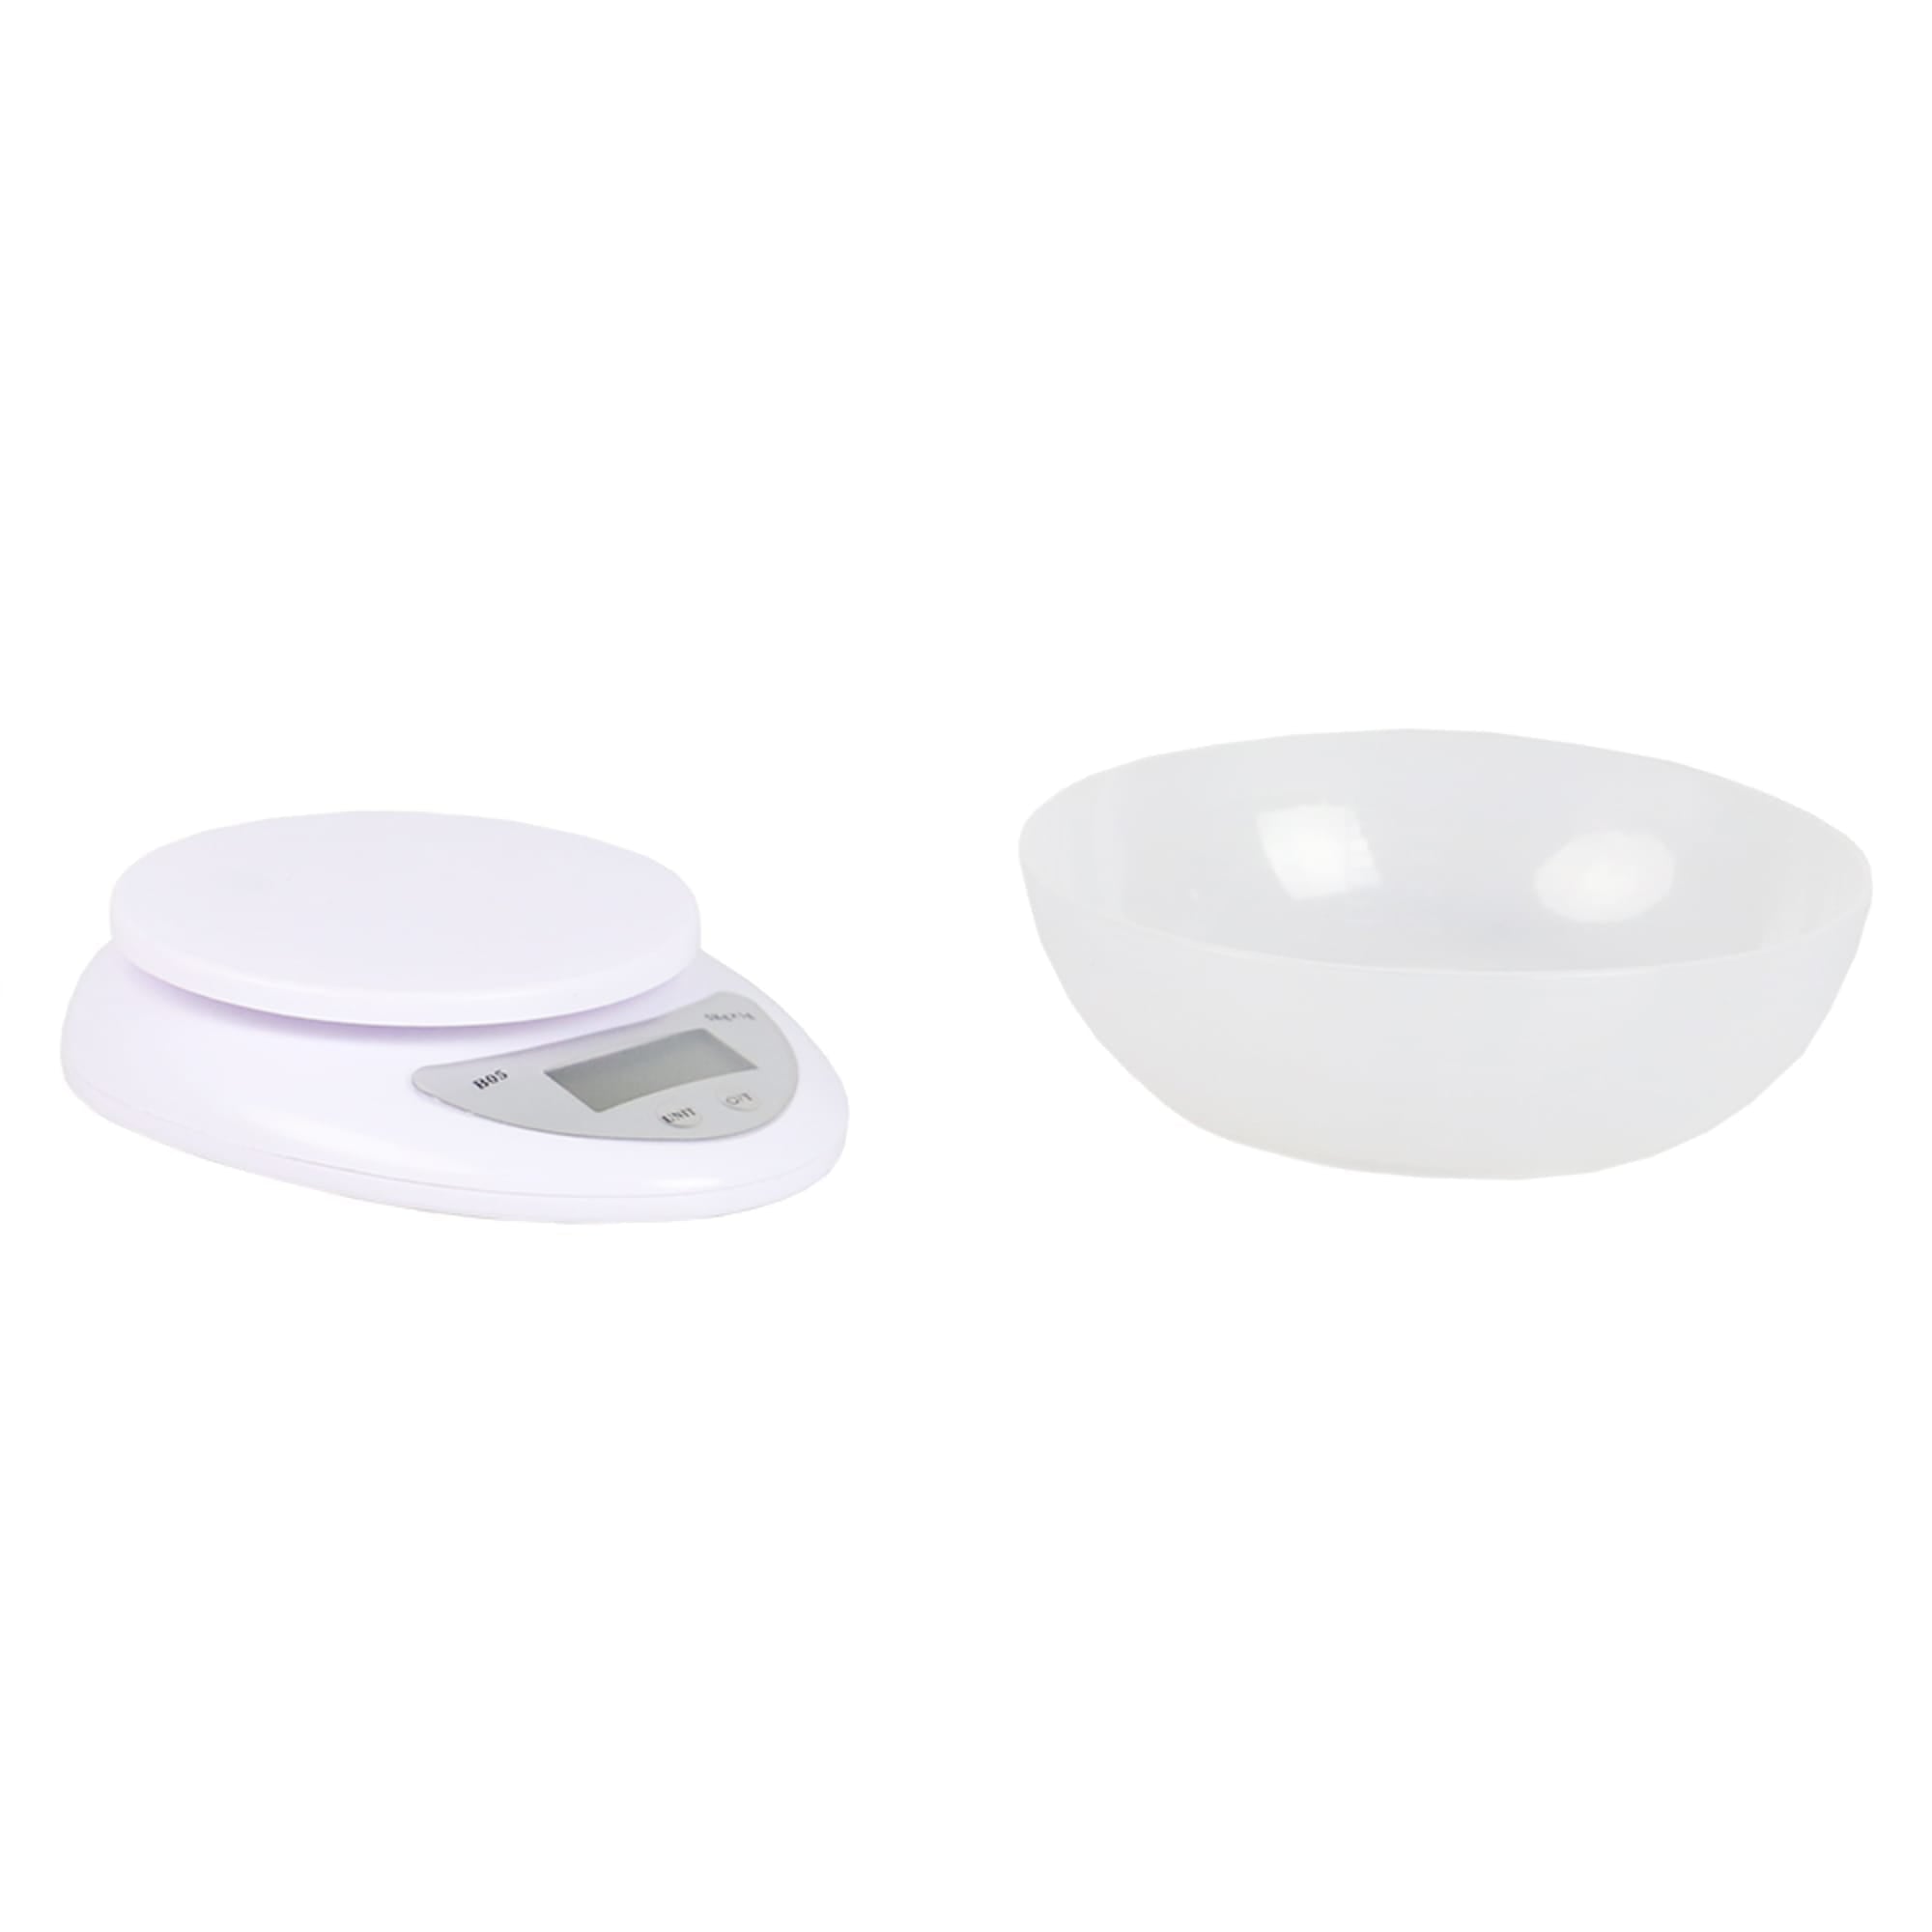 Home Basics  Digital Food Scale with Plastic Bowl, White $8.00 EACH, CASE PACK OF 12